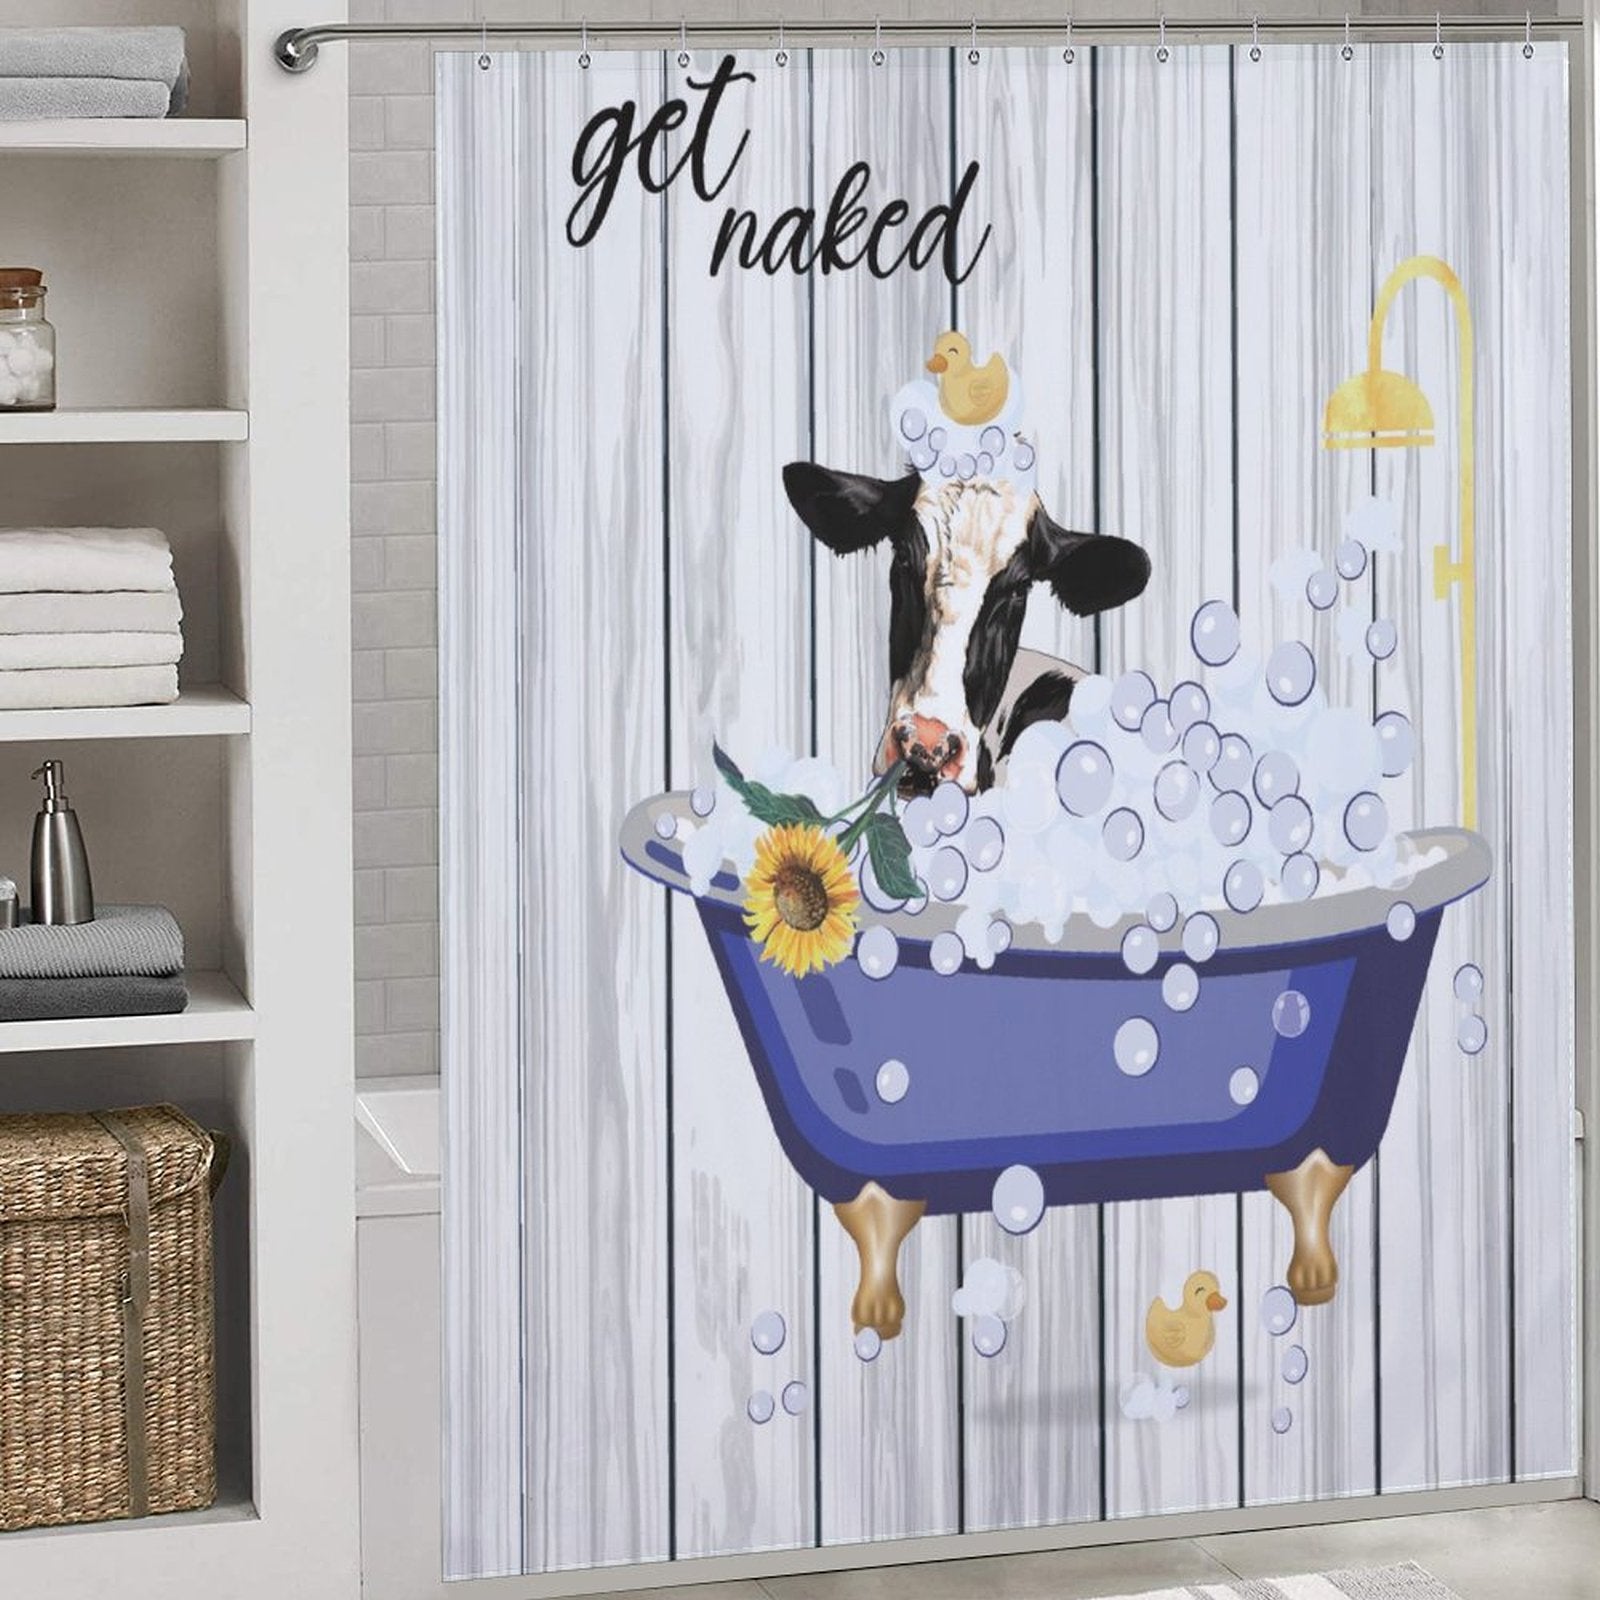 The Funny Cow Sunflowers Get Naked Shower Curtain-Cottoncat by Cotton Cat showcases a cow taking a bubble bath in a blue tub with rubber ducks, sunflowers, and the playful text "get naked" above. Towels and toiletry items are neatly arranged on shelves nearby.